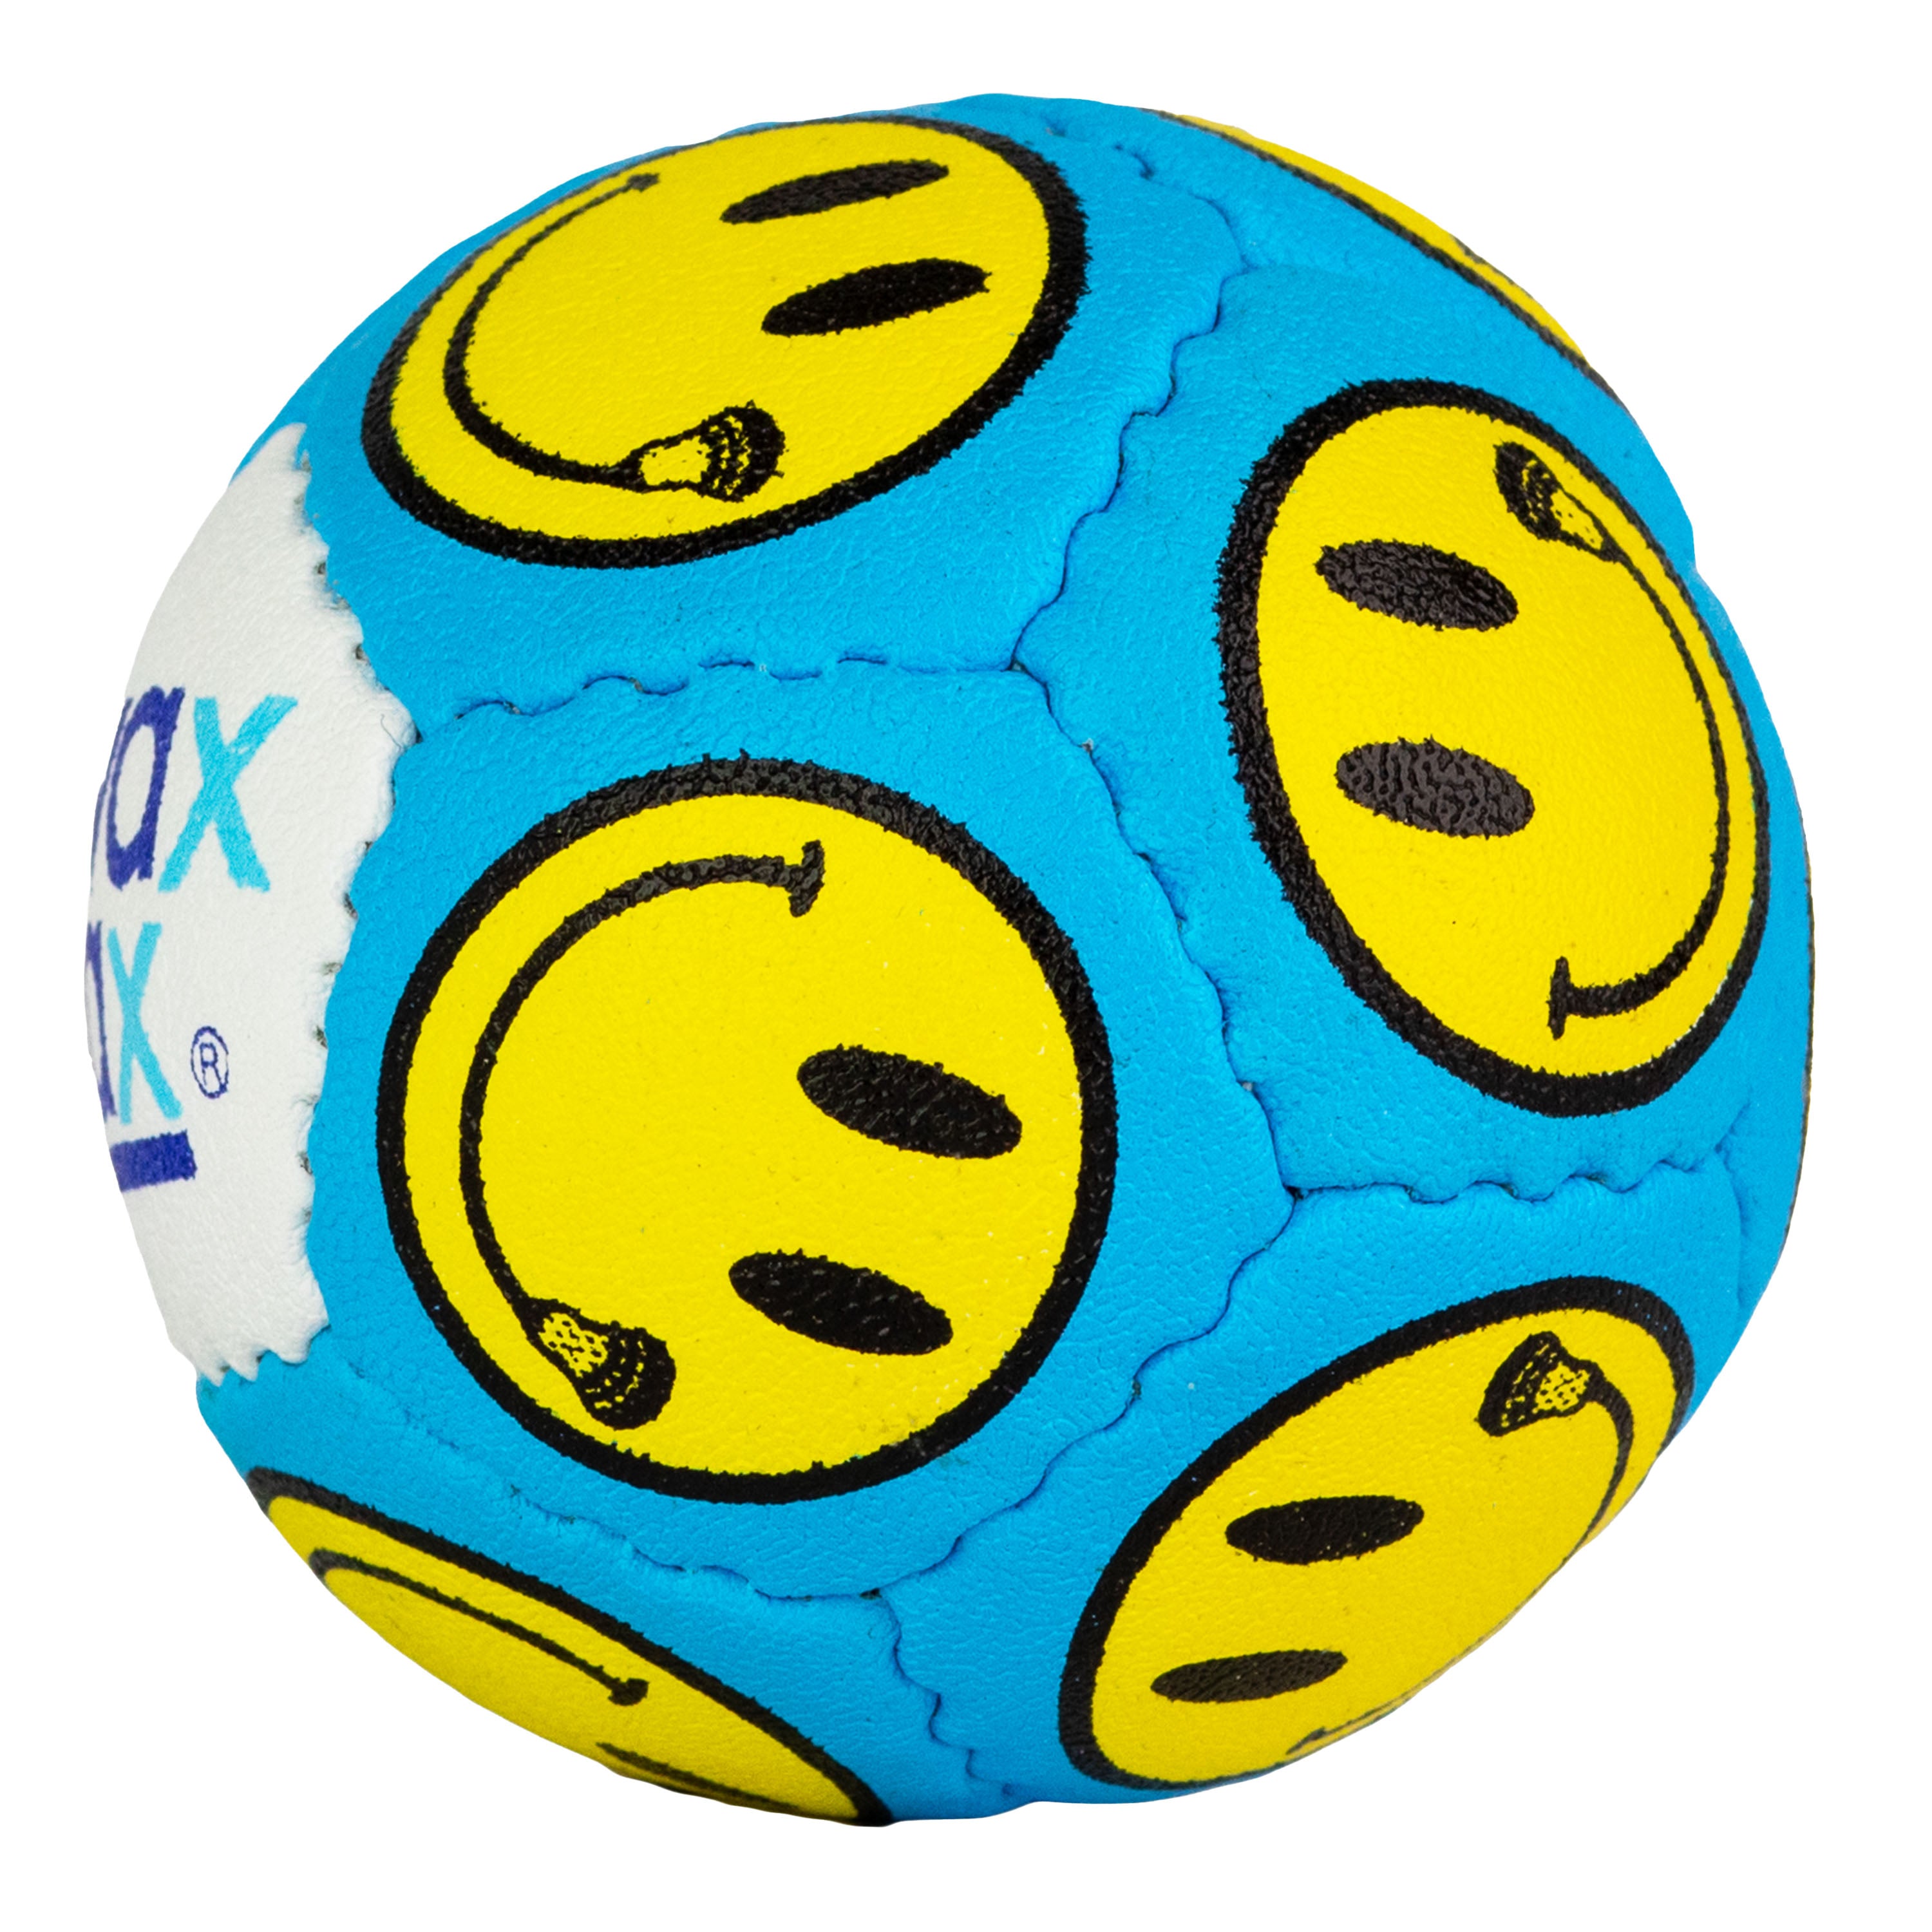 Smile Swax Lax lacrosse training ball - side view - smiley face with lacrosse stick mouth